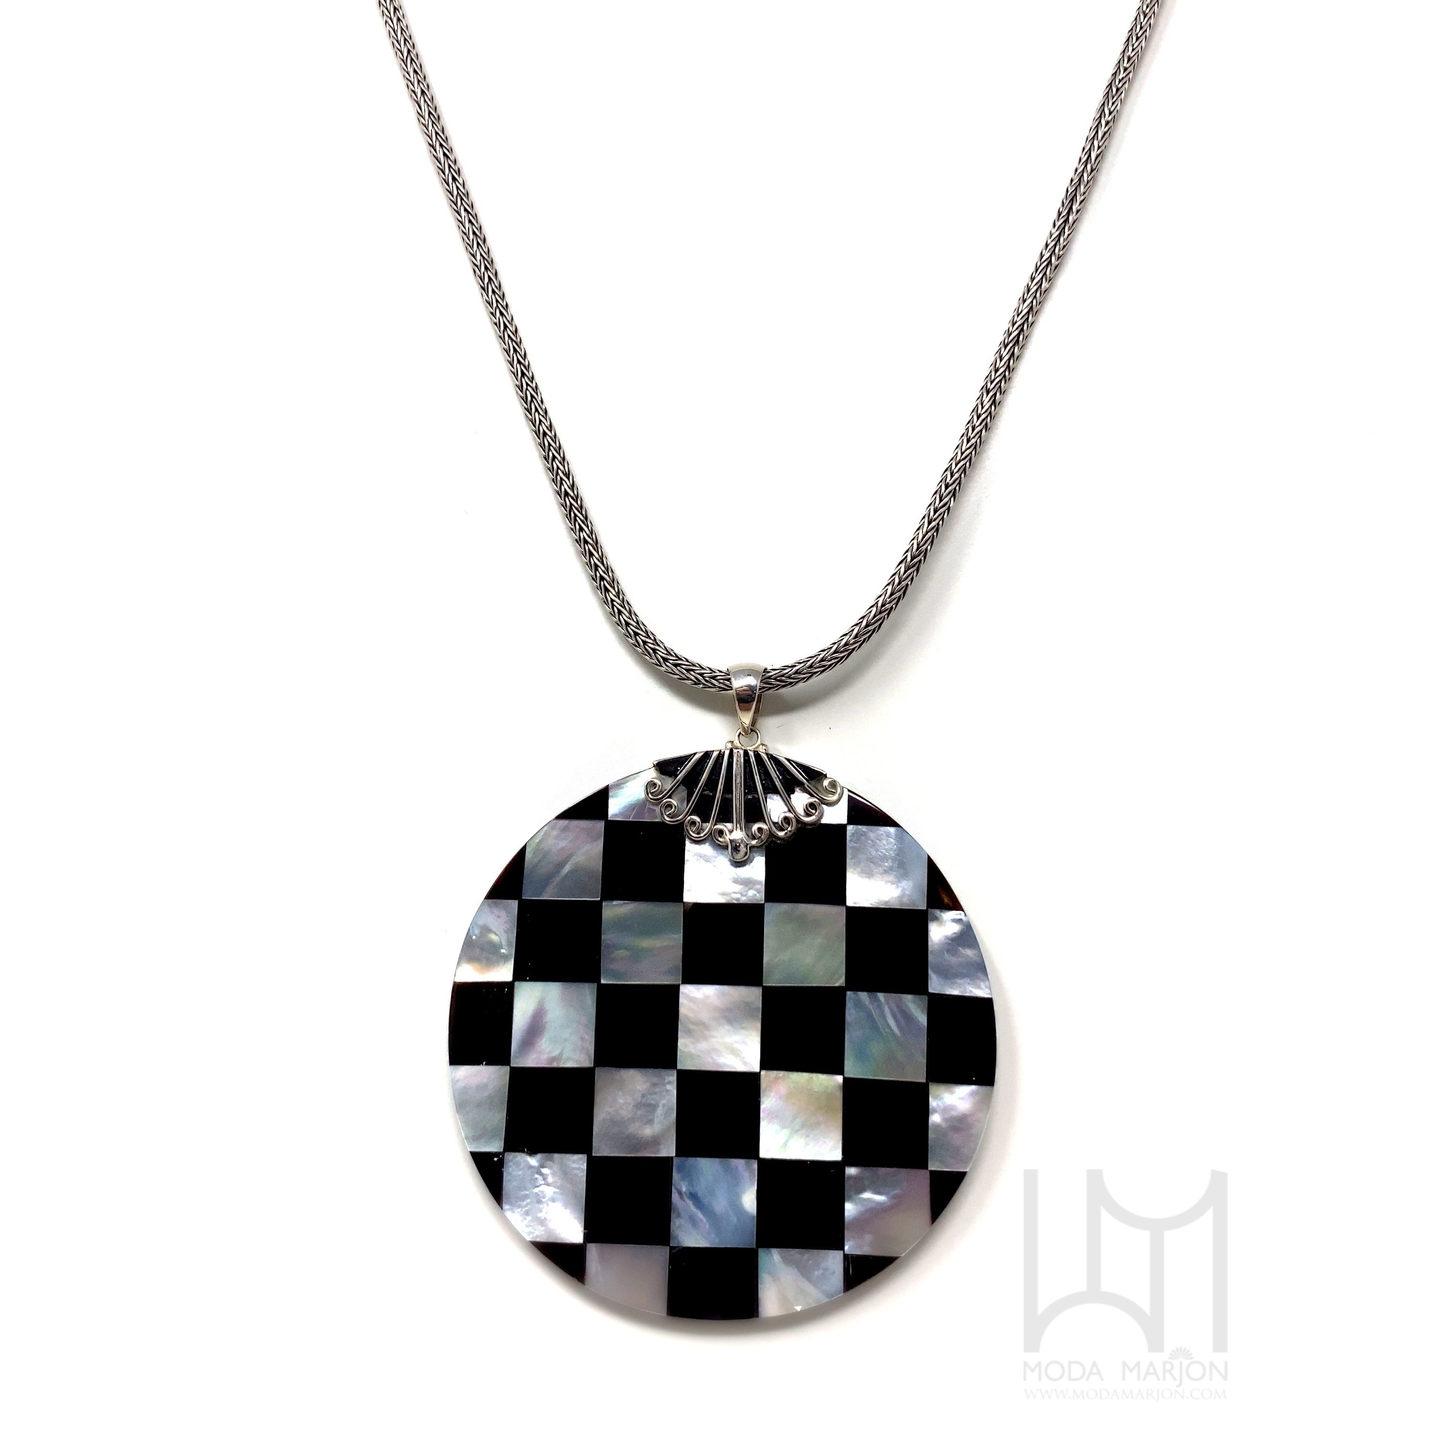 Checkered Onyx/ Mother of Pearl Pendant